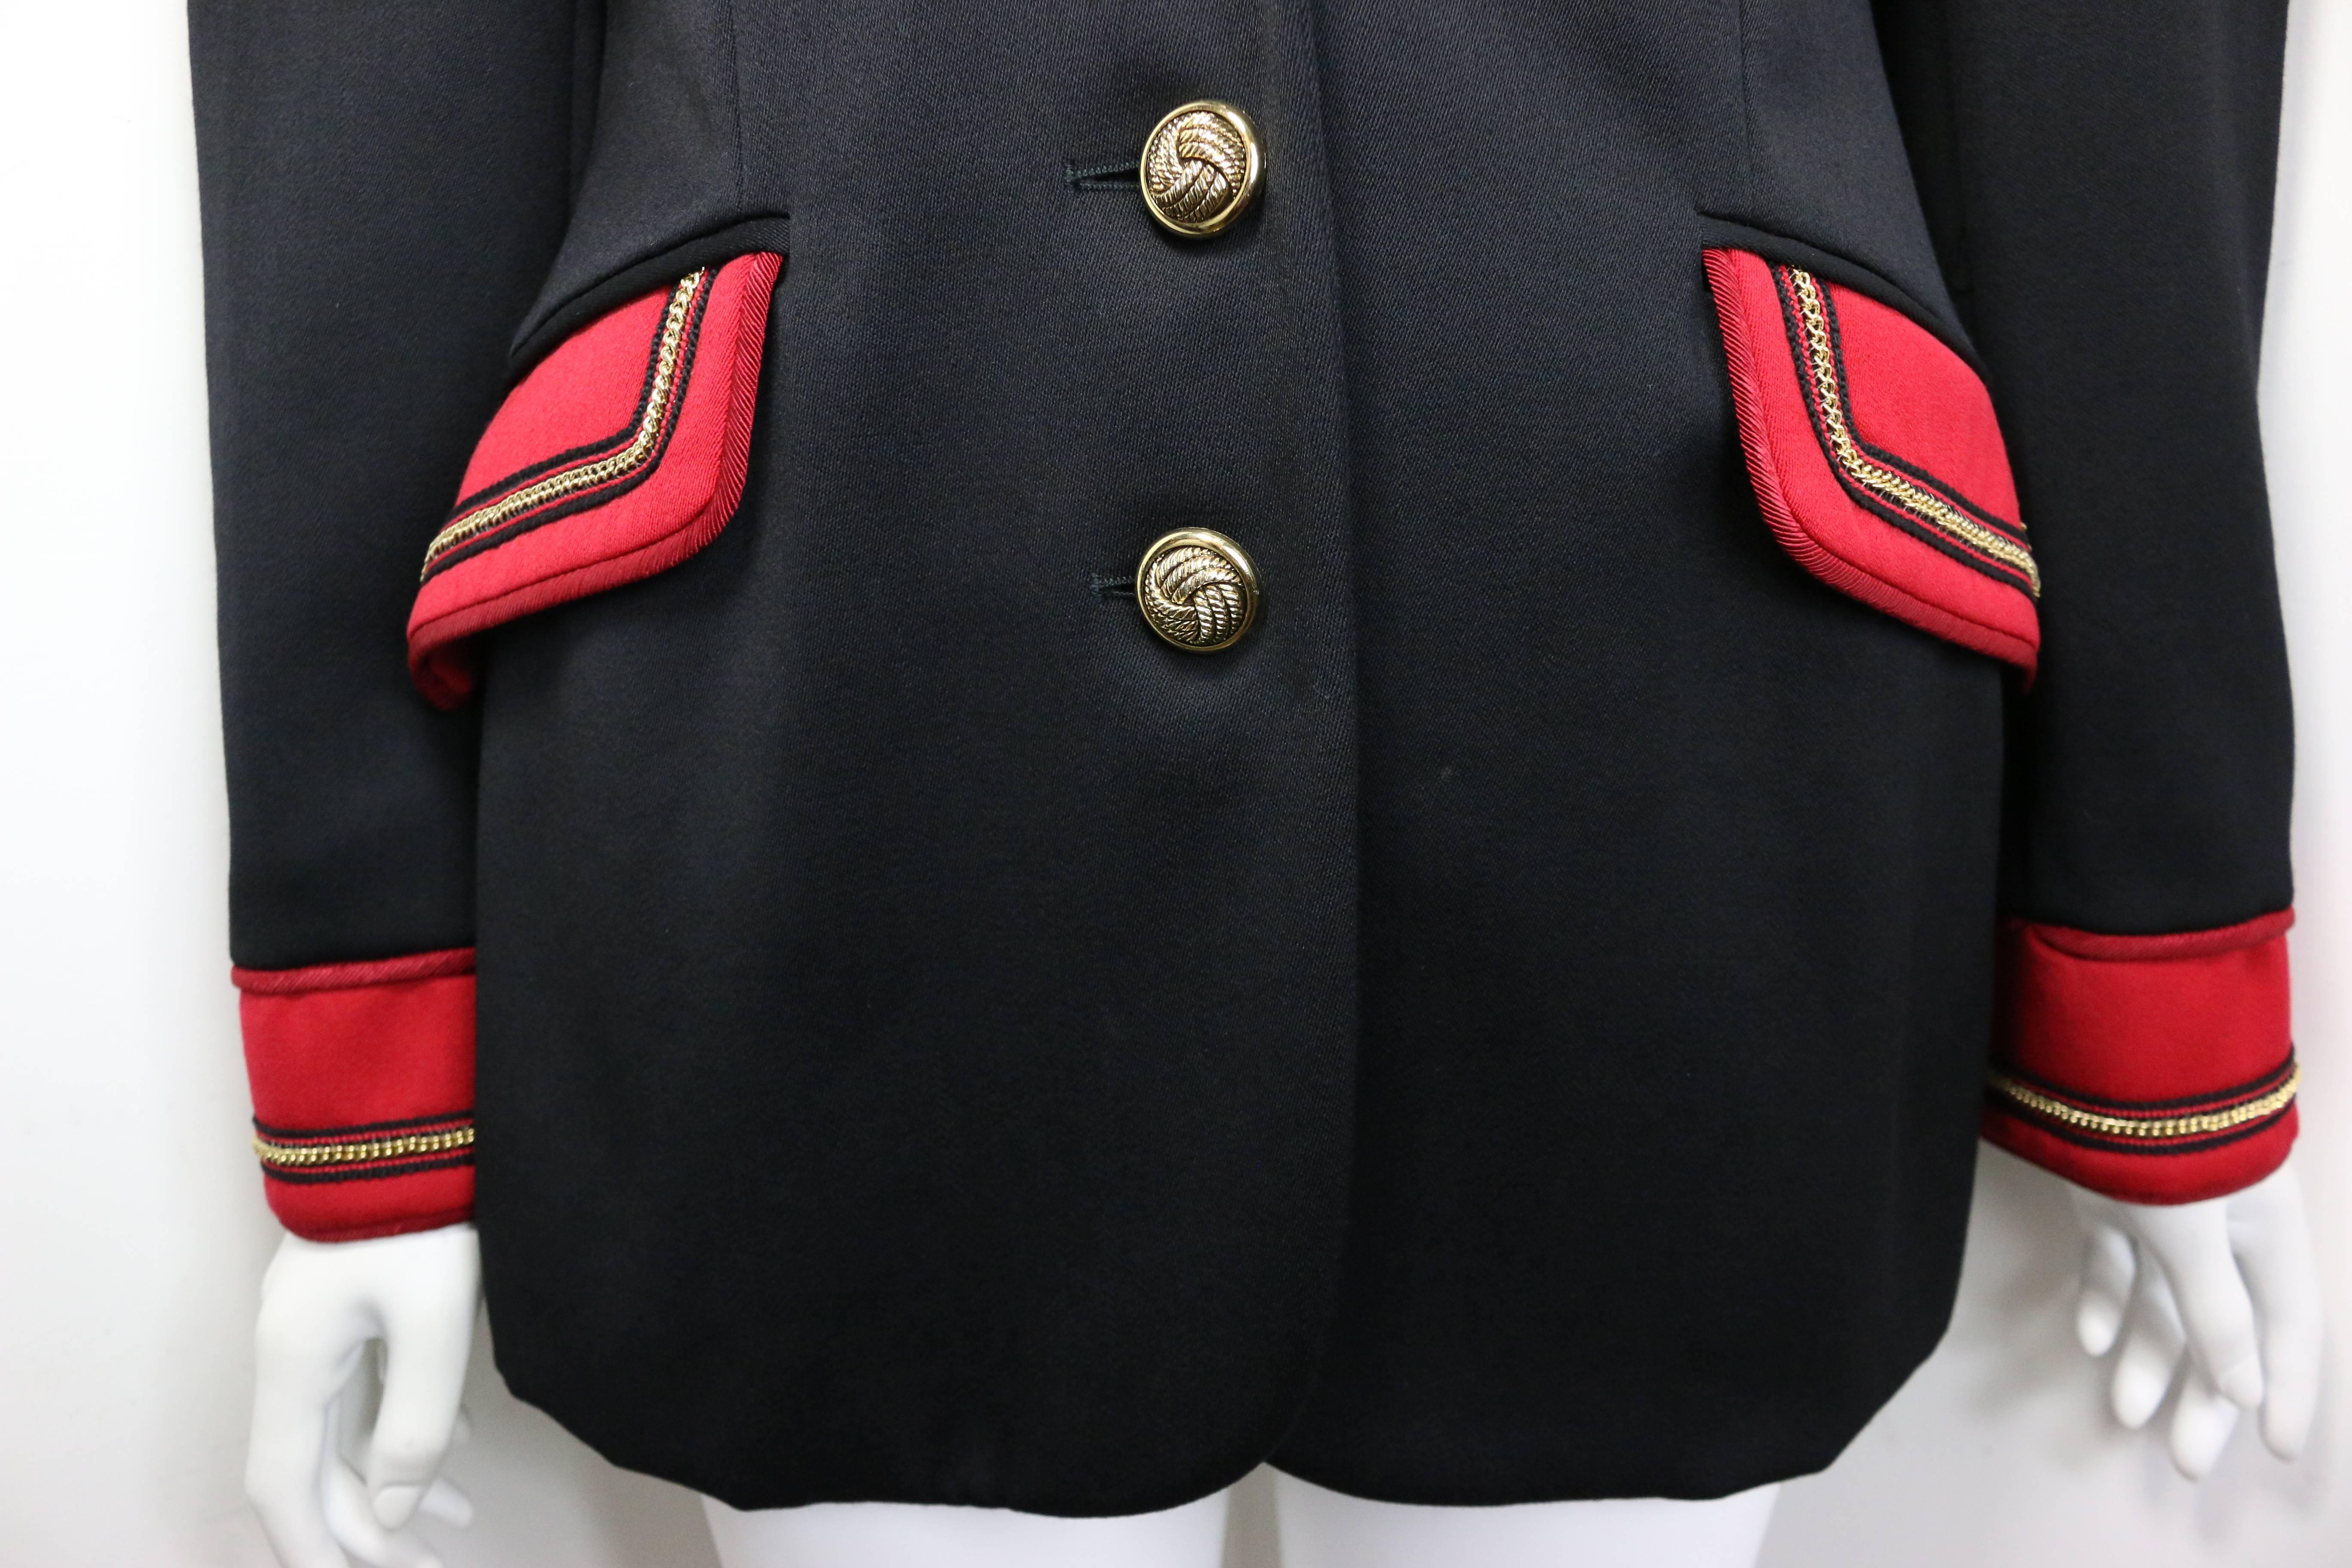 - Vintage 80s Alberta Ferretti Studio officer jacket in black. 

- Featuring red trim with gold link chain collar lapel, front flap pockets and cuffs. Three gold toned link buttons closing. 

- Made in Italy. 

- Size IT 42, US 8. 

- 100%